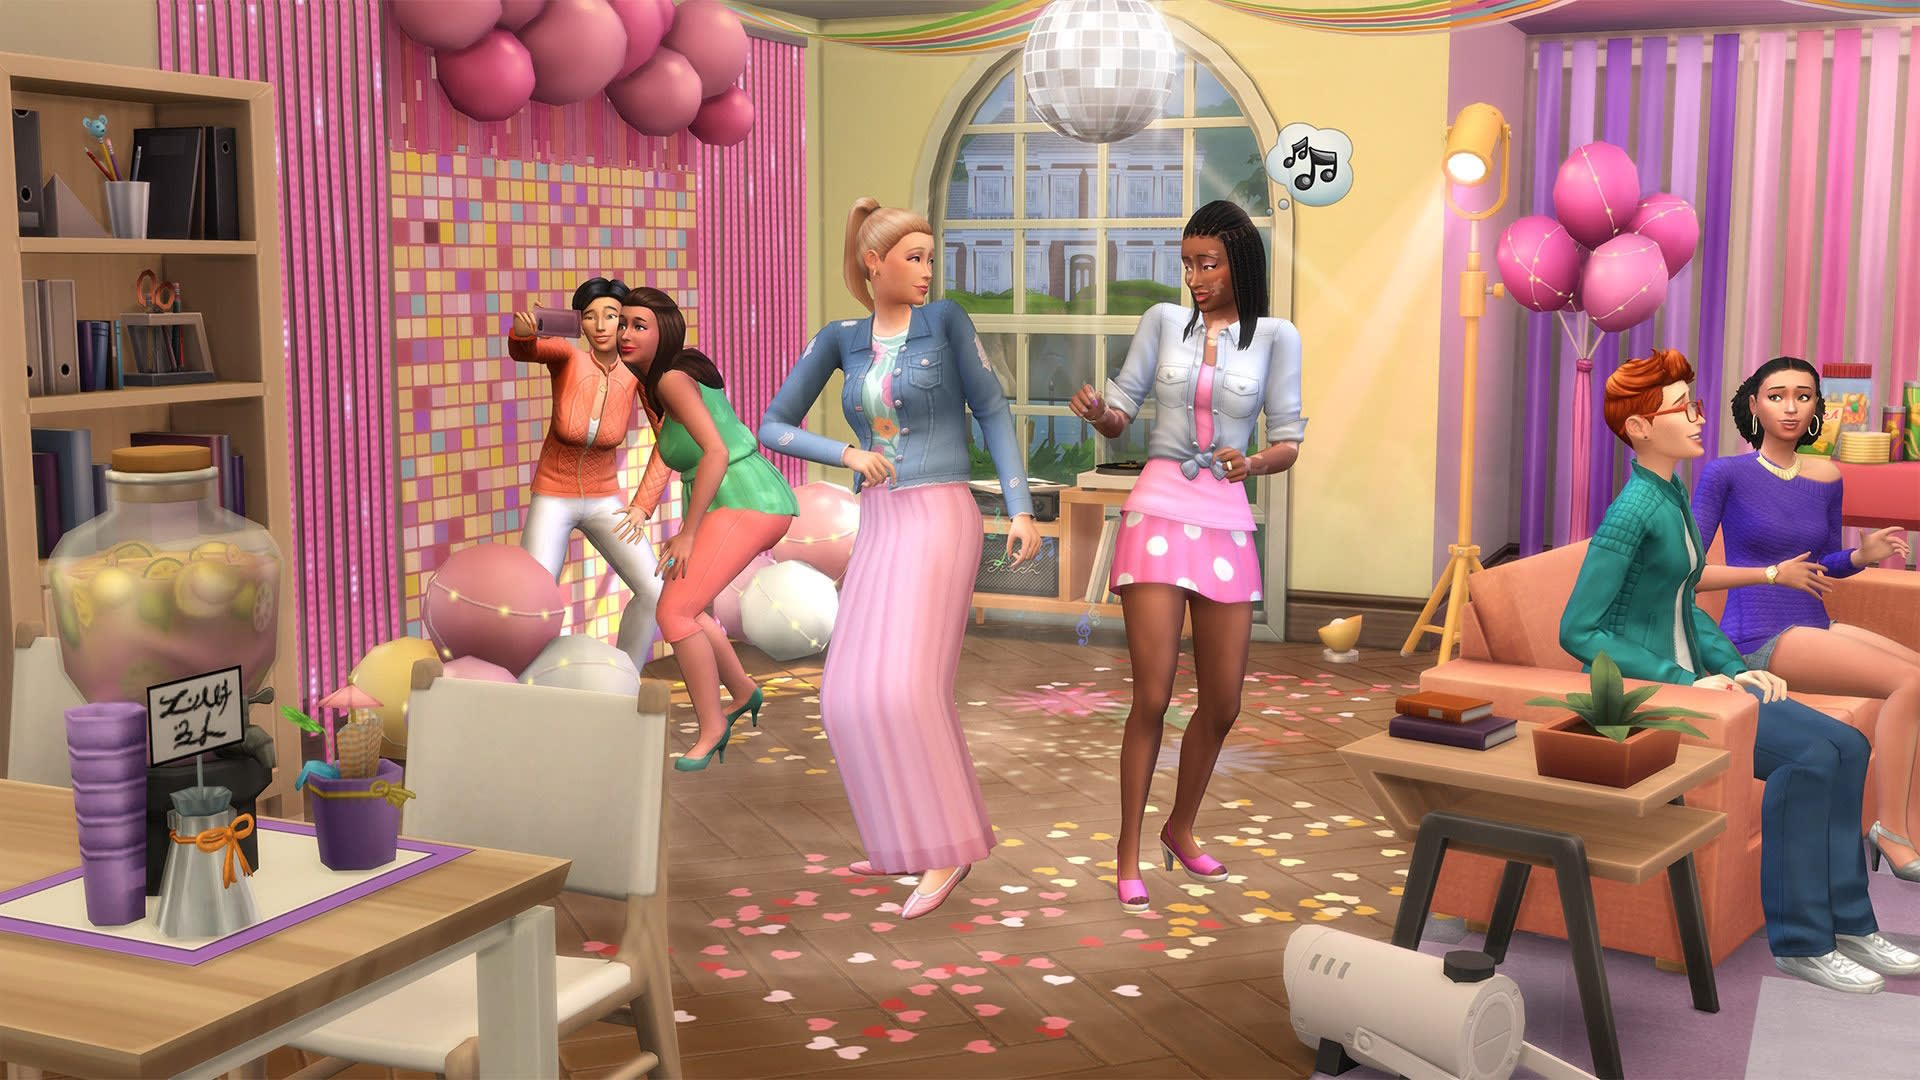 A group of Sims 4 Sims partying in a house decorated with pink party favors